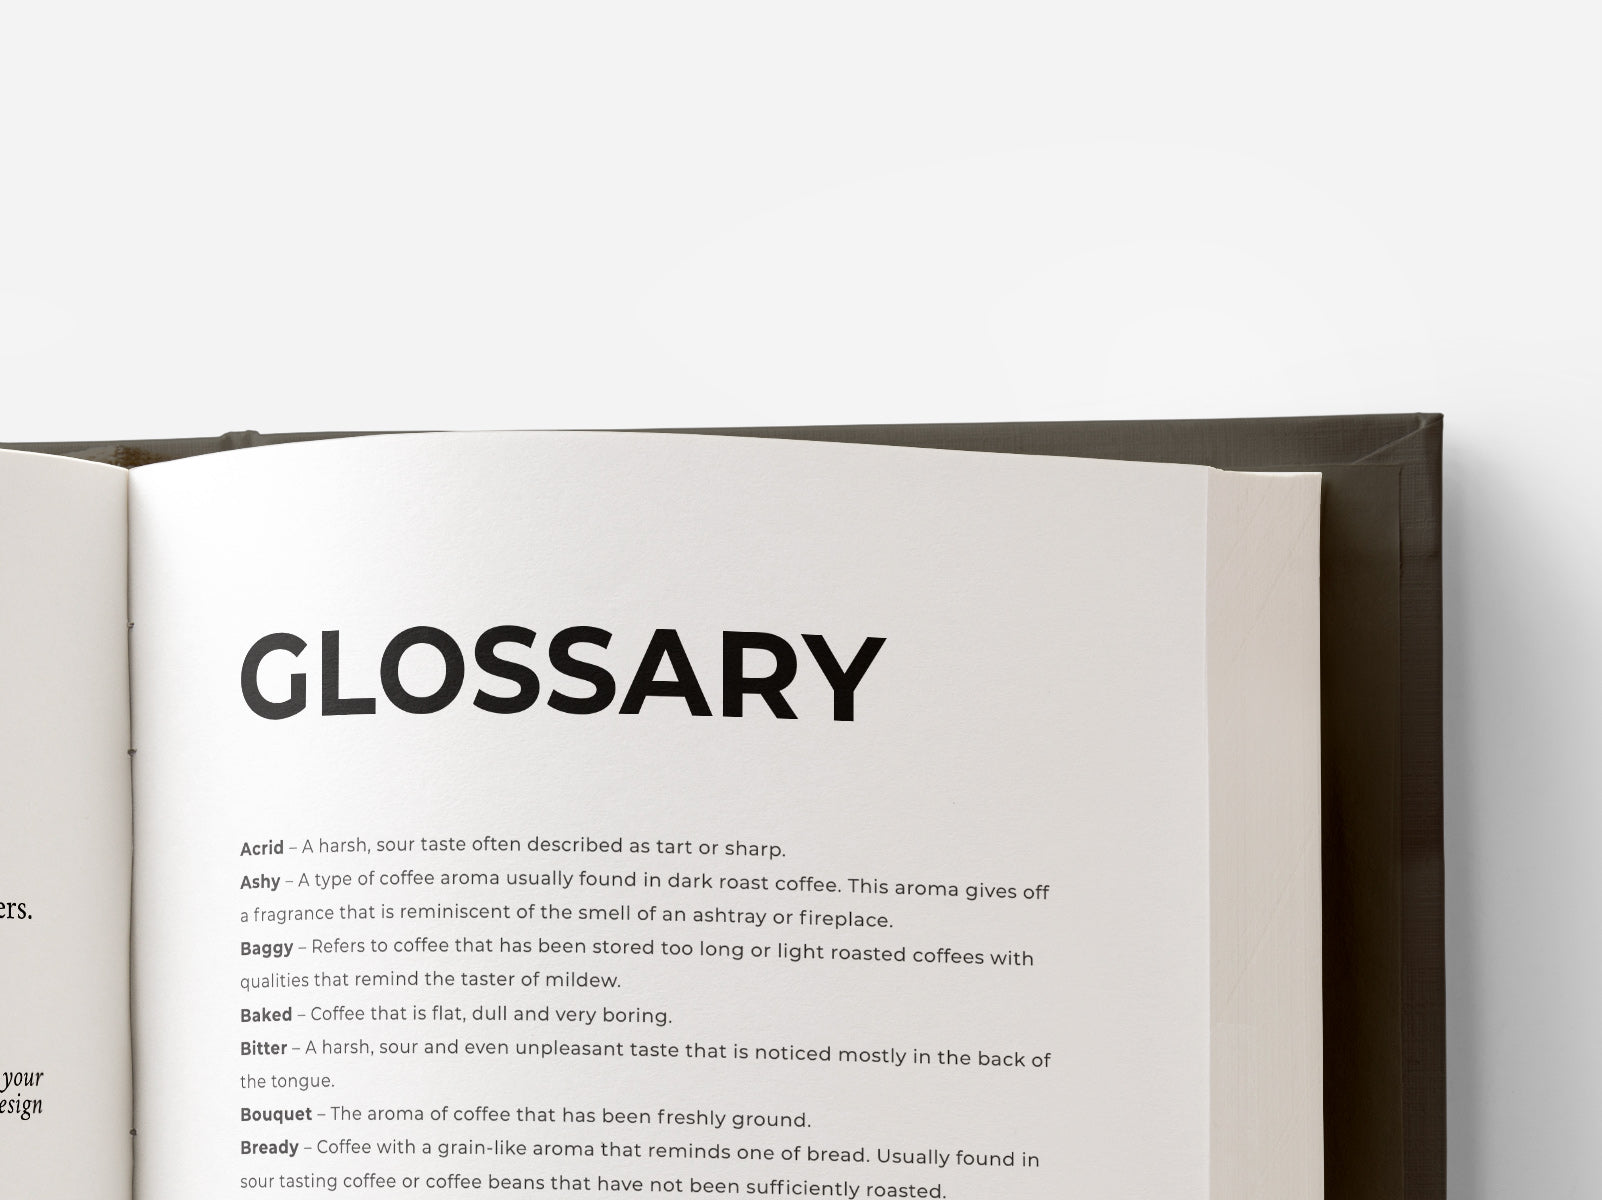 TASTE | The Glossary of Common Coffee Tasting Terms